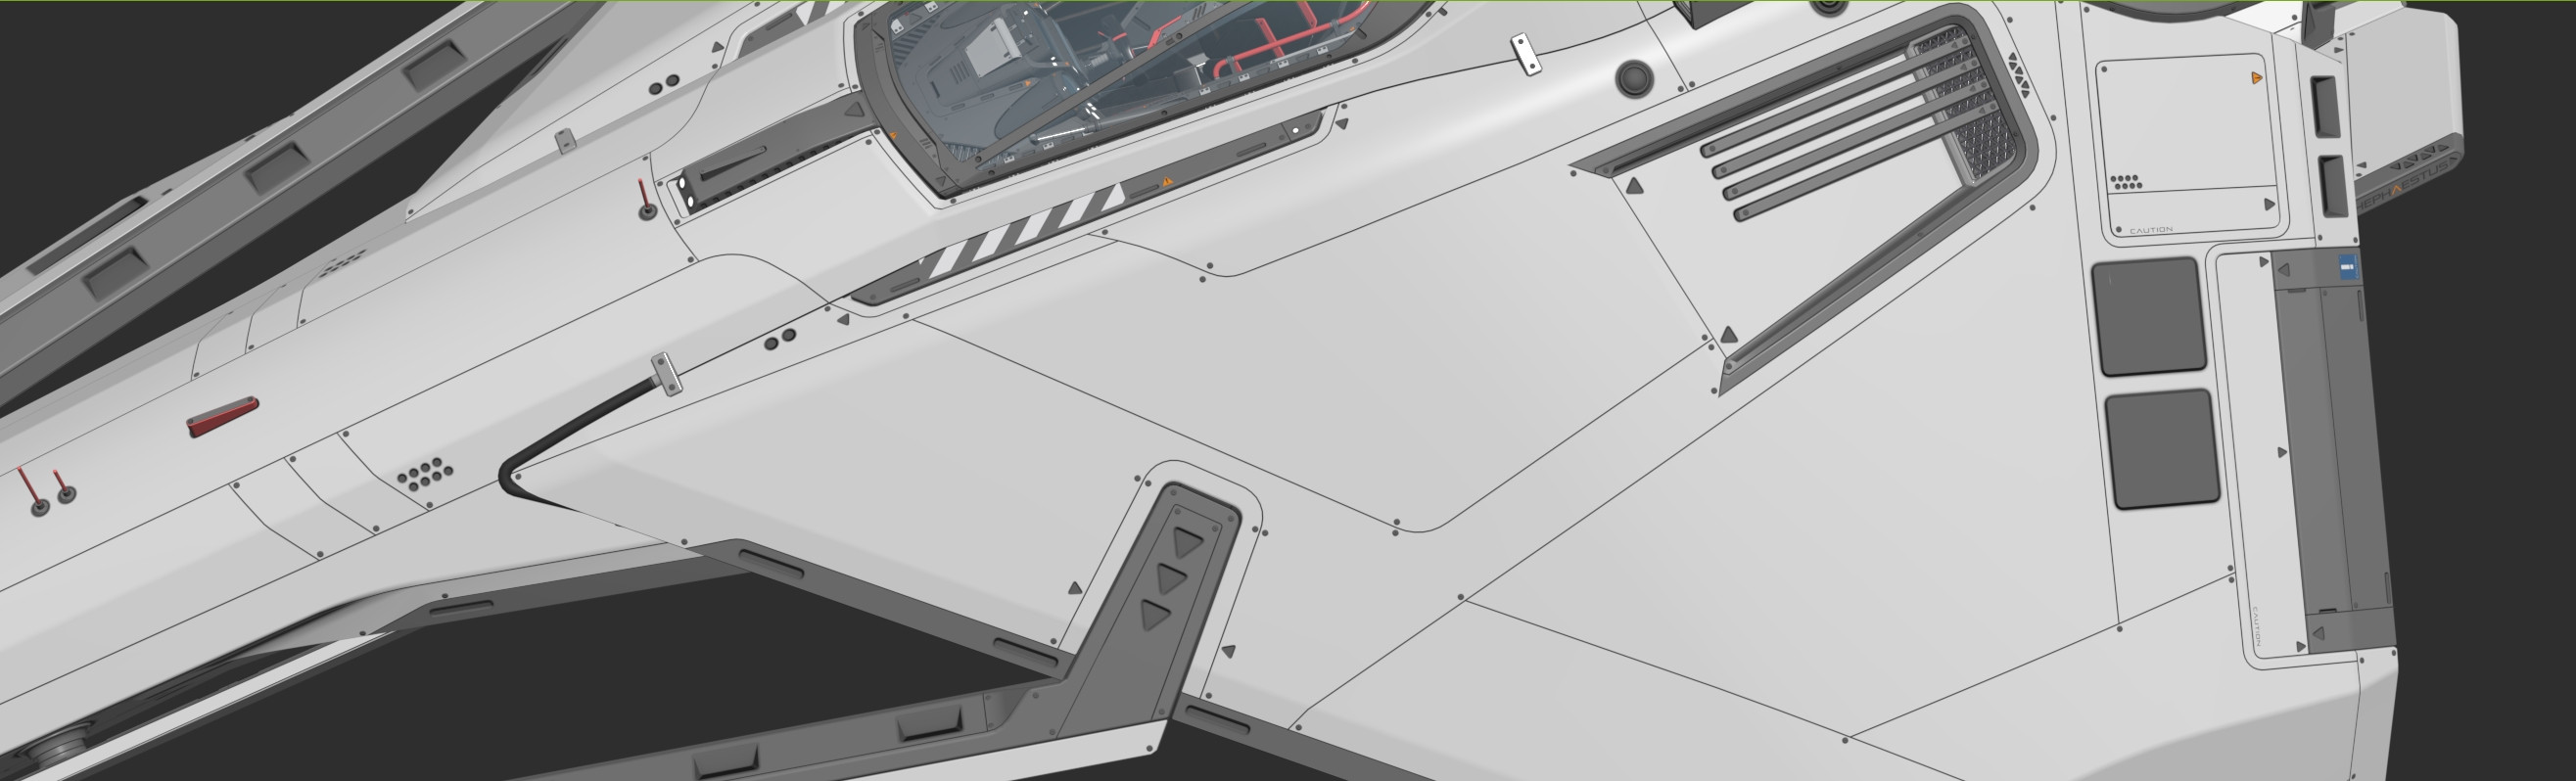 Screenshot of the ship exterior in Max with panel lines applied.